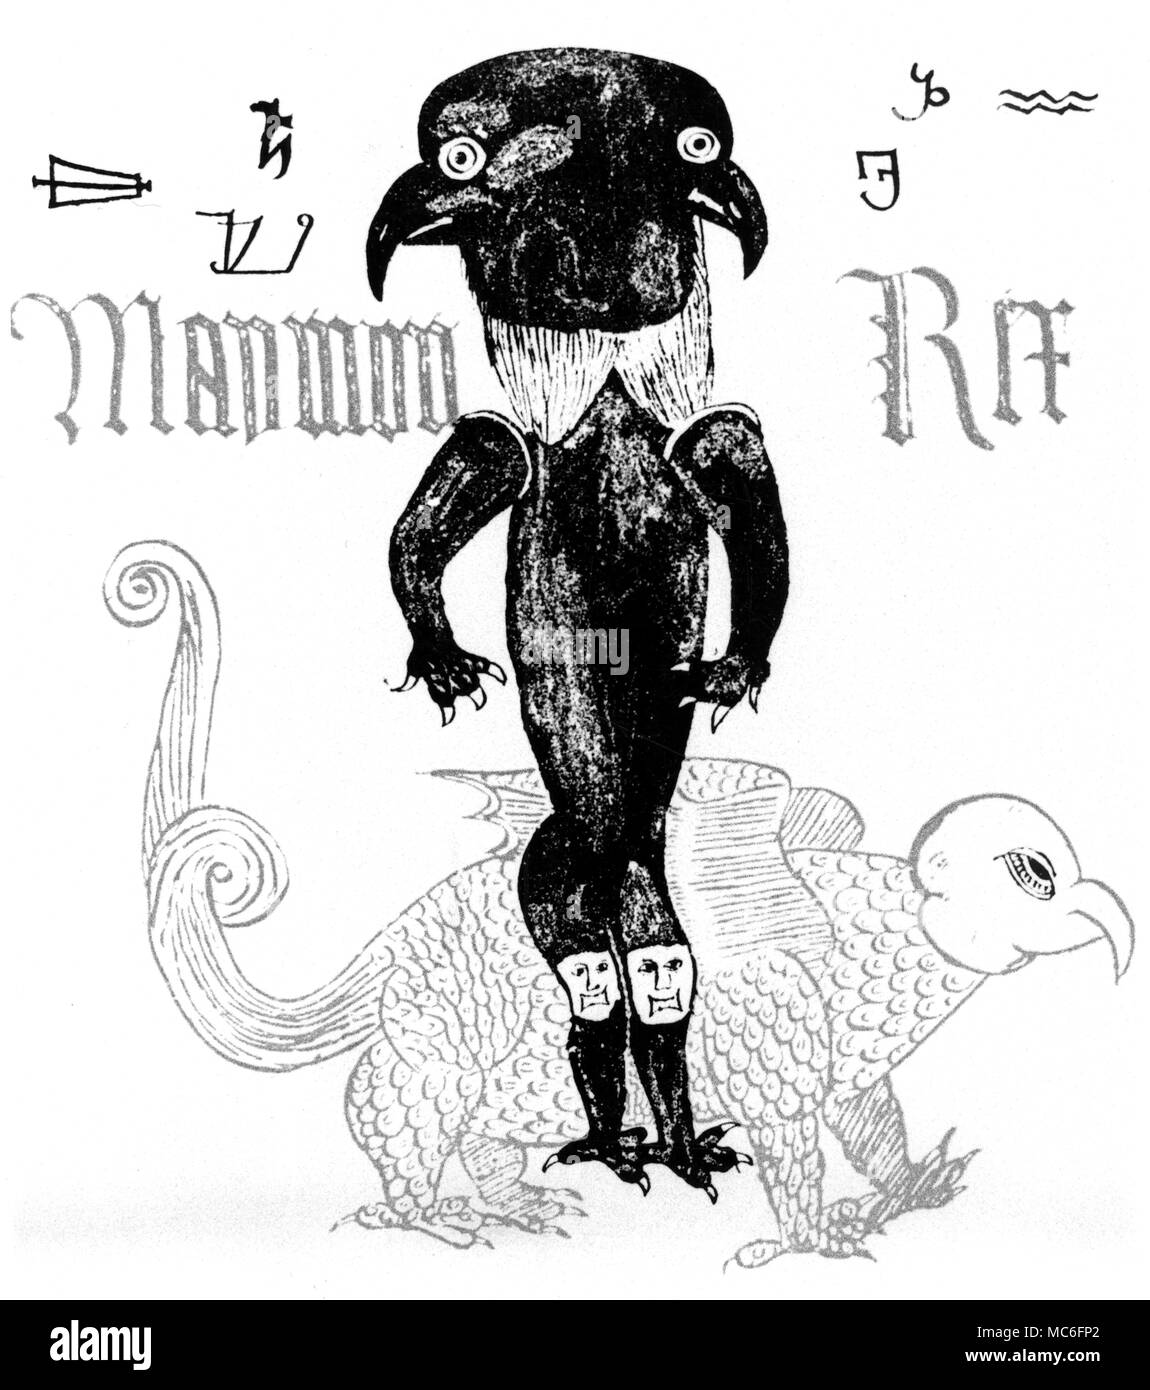 Page from a sixteenth century English Grimoire mss, with the image of the bird-headed Maymon Rex (King Mammon, presumably), and a variety of demonic sigils from the Solomon the King grimoire. This two-faced demon is a relic of the Egyptian, Horus, who was, in his role as Haroeris, given the head of a falcon. Stock Photo